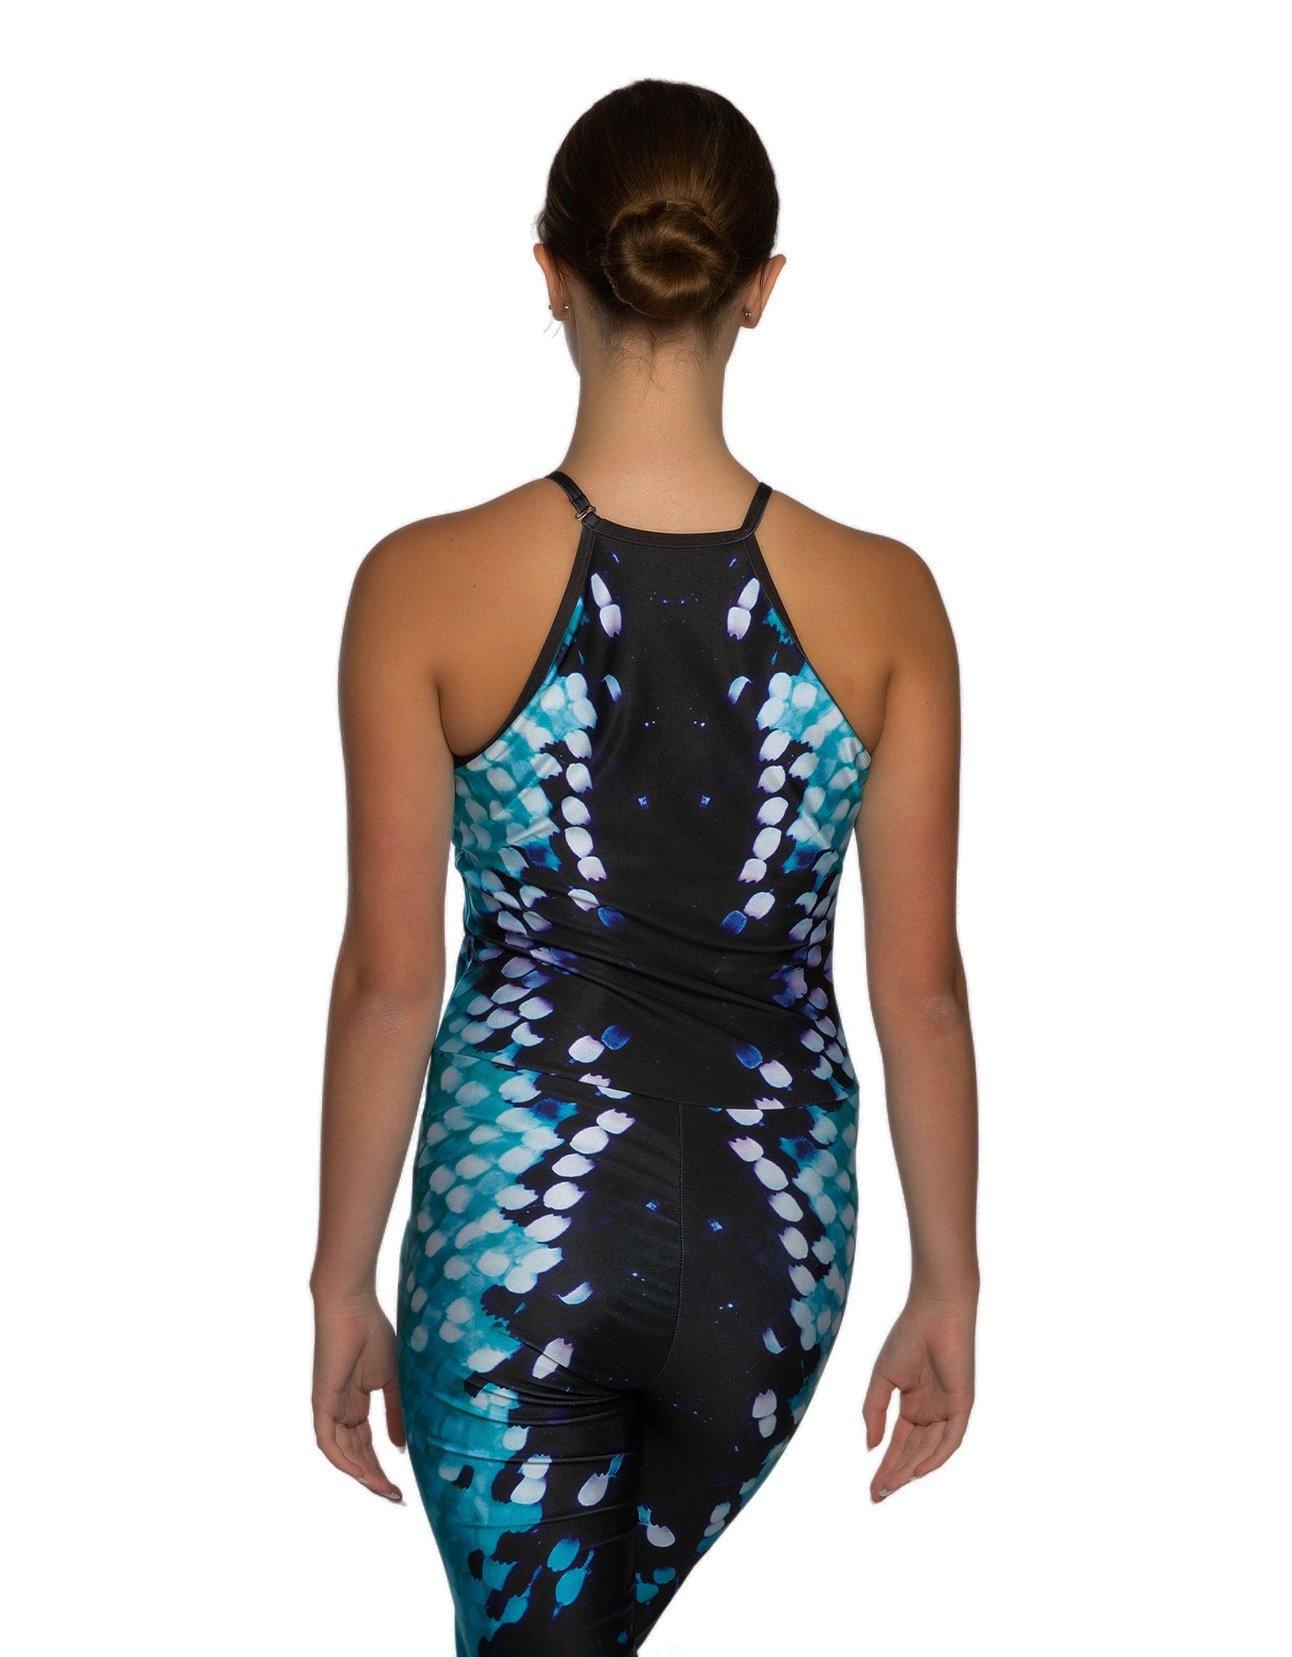 Butterfly Wing Halter Unitard - Hamilton Theatrical